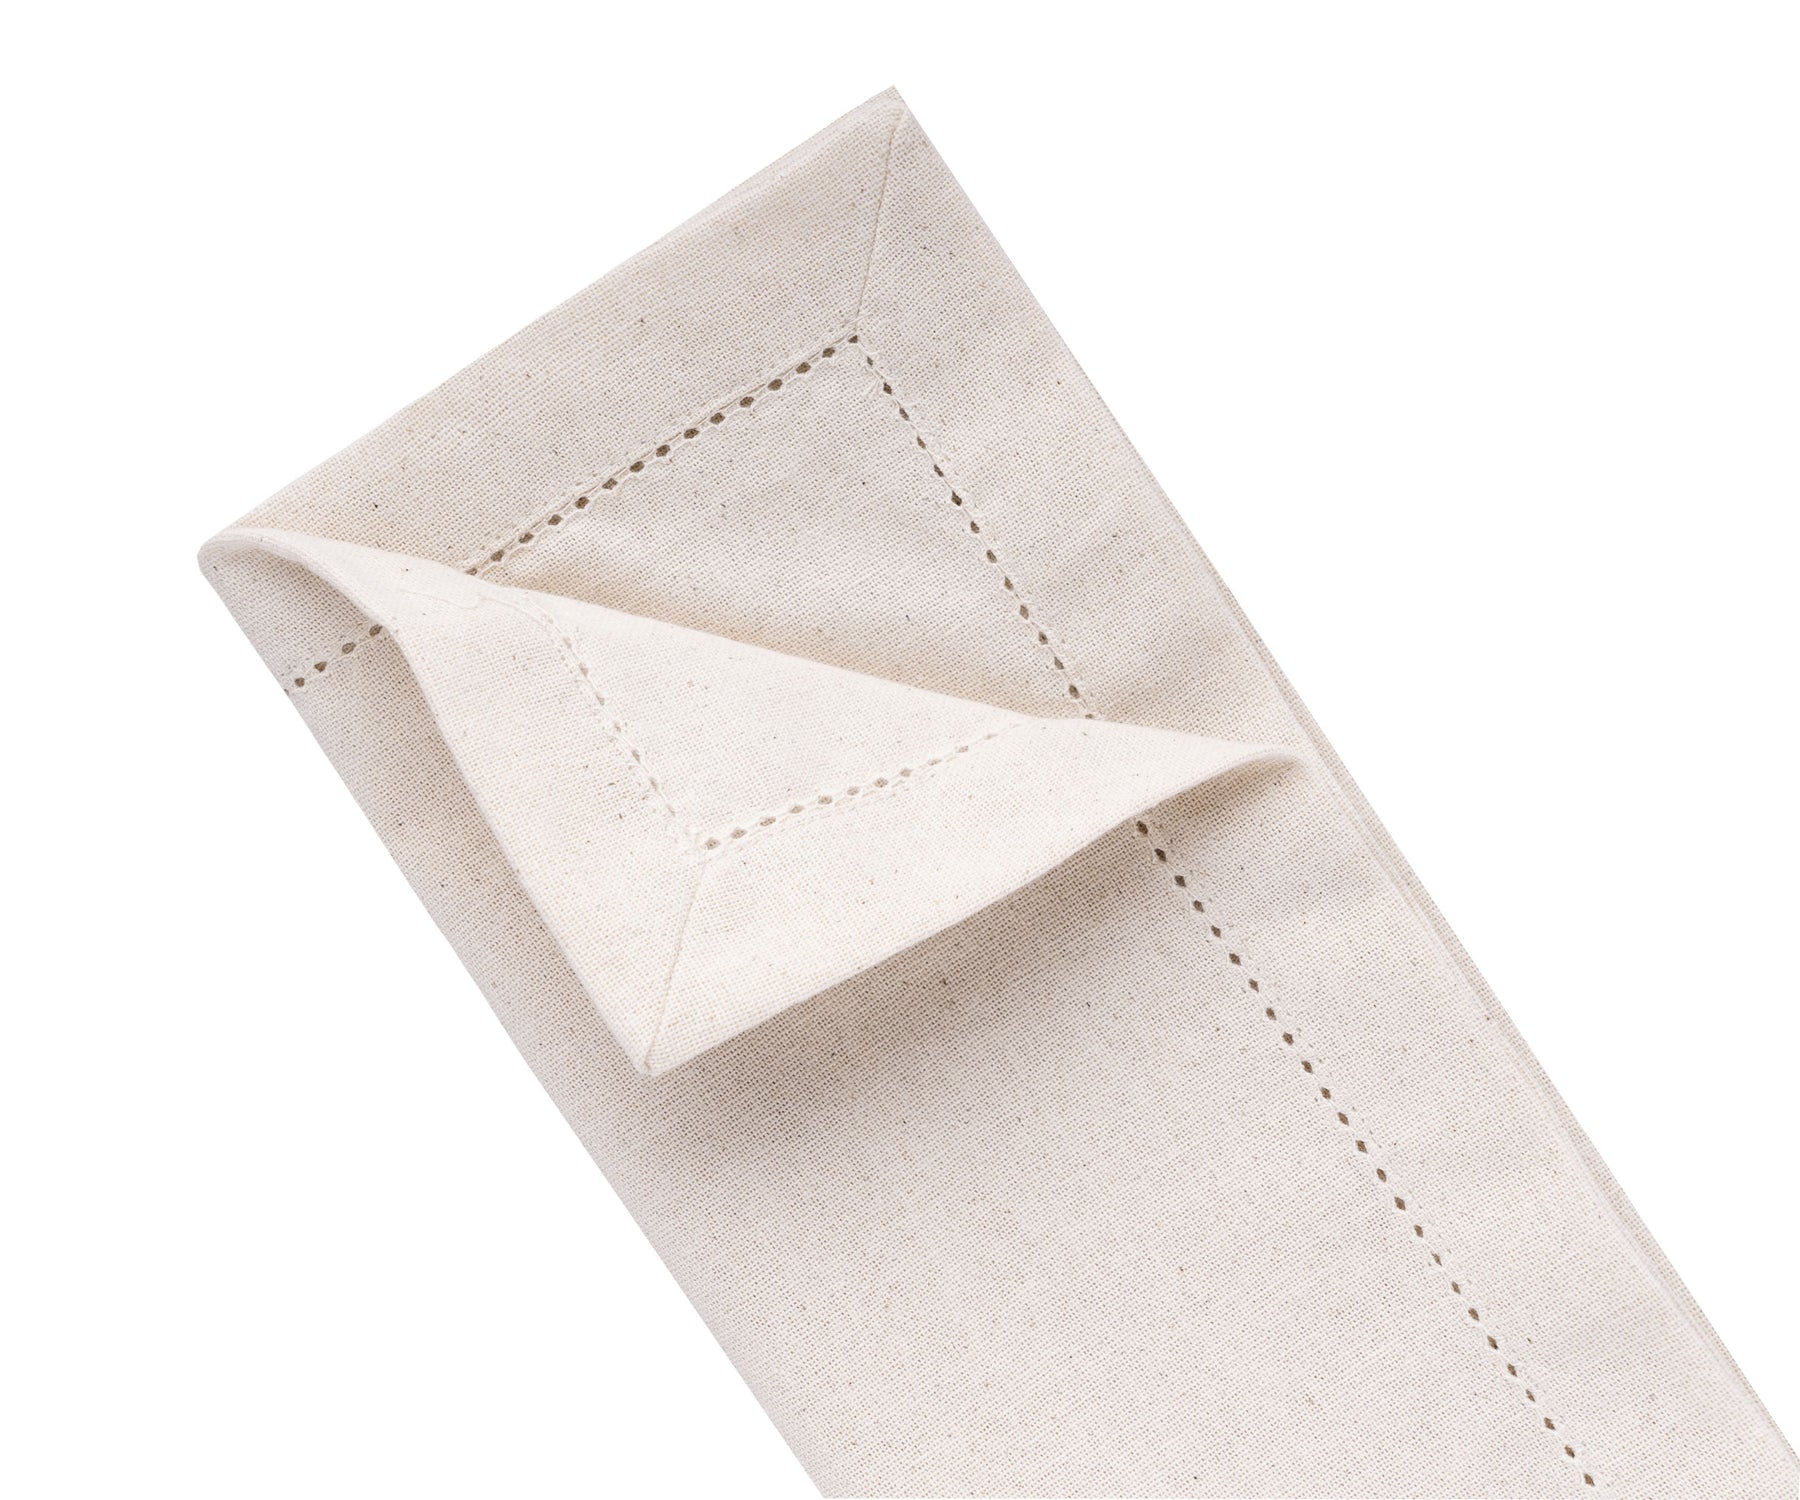 Hemstitch napkins in a natural color offer a timeless aesthetic